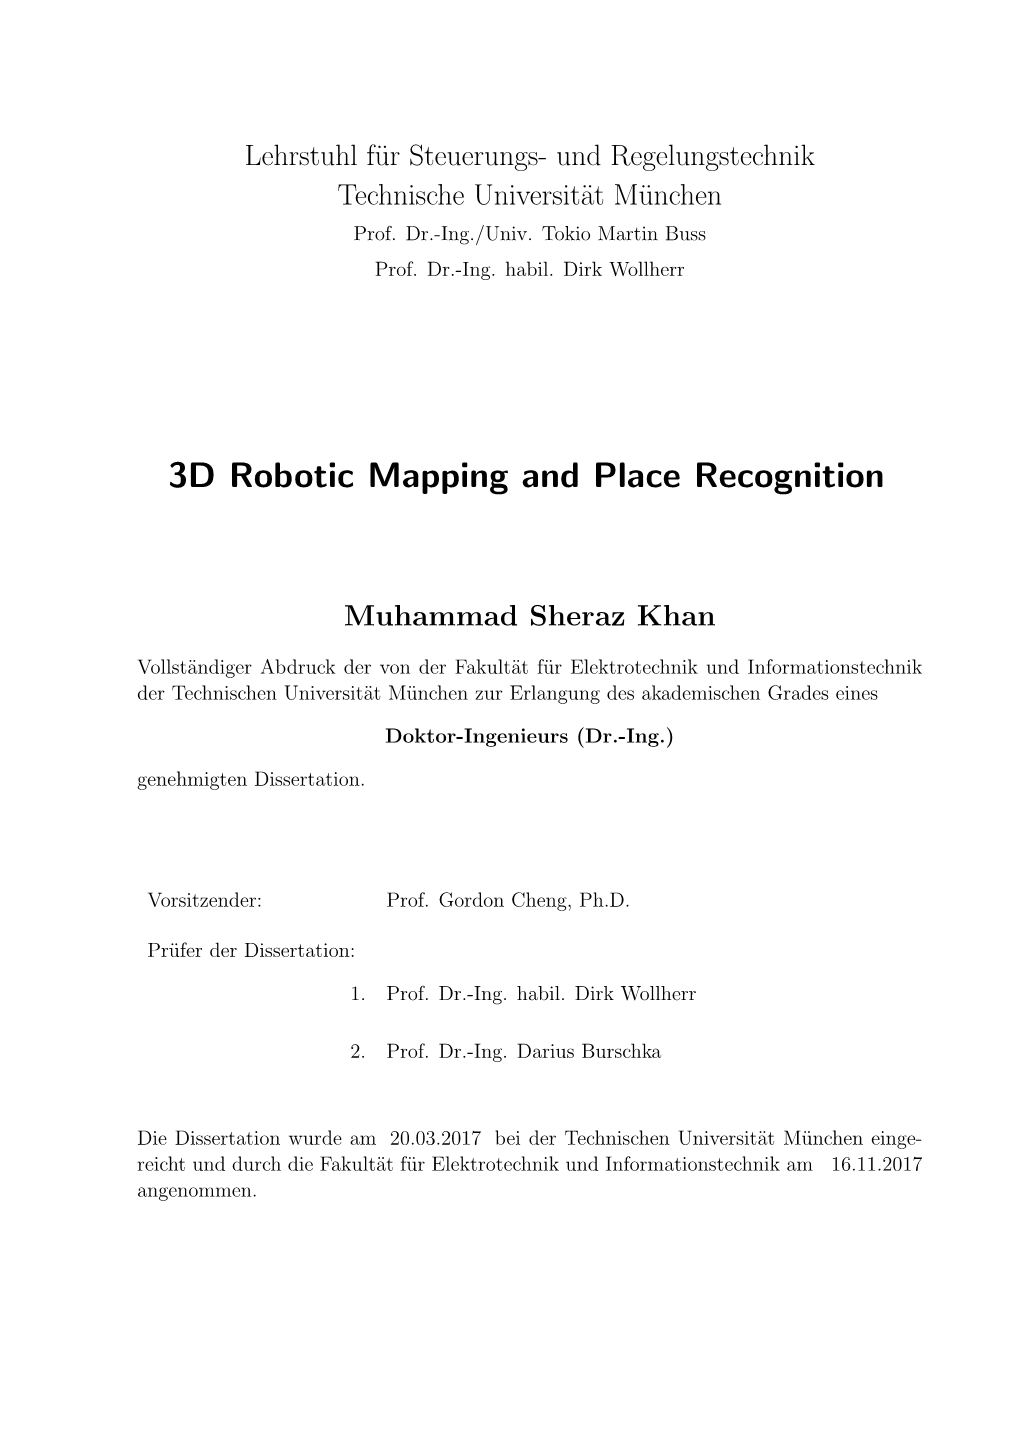 3D Robotic Mapping and Place Recognition